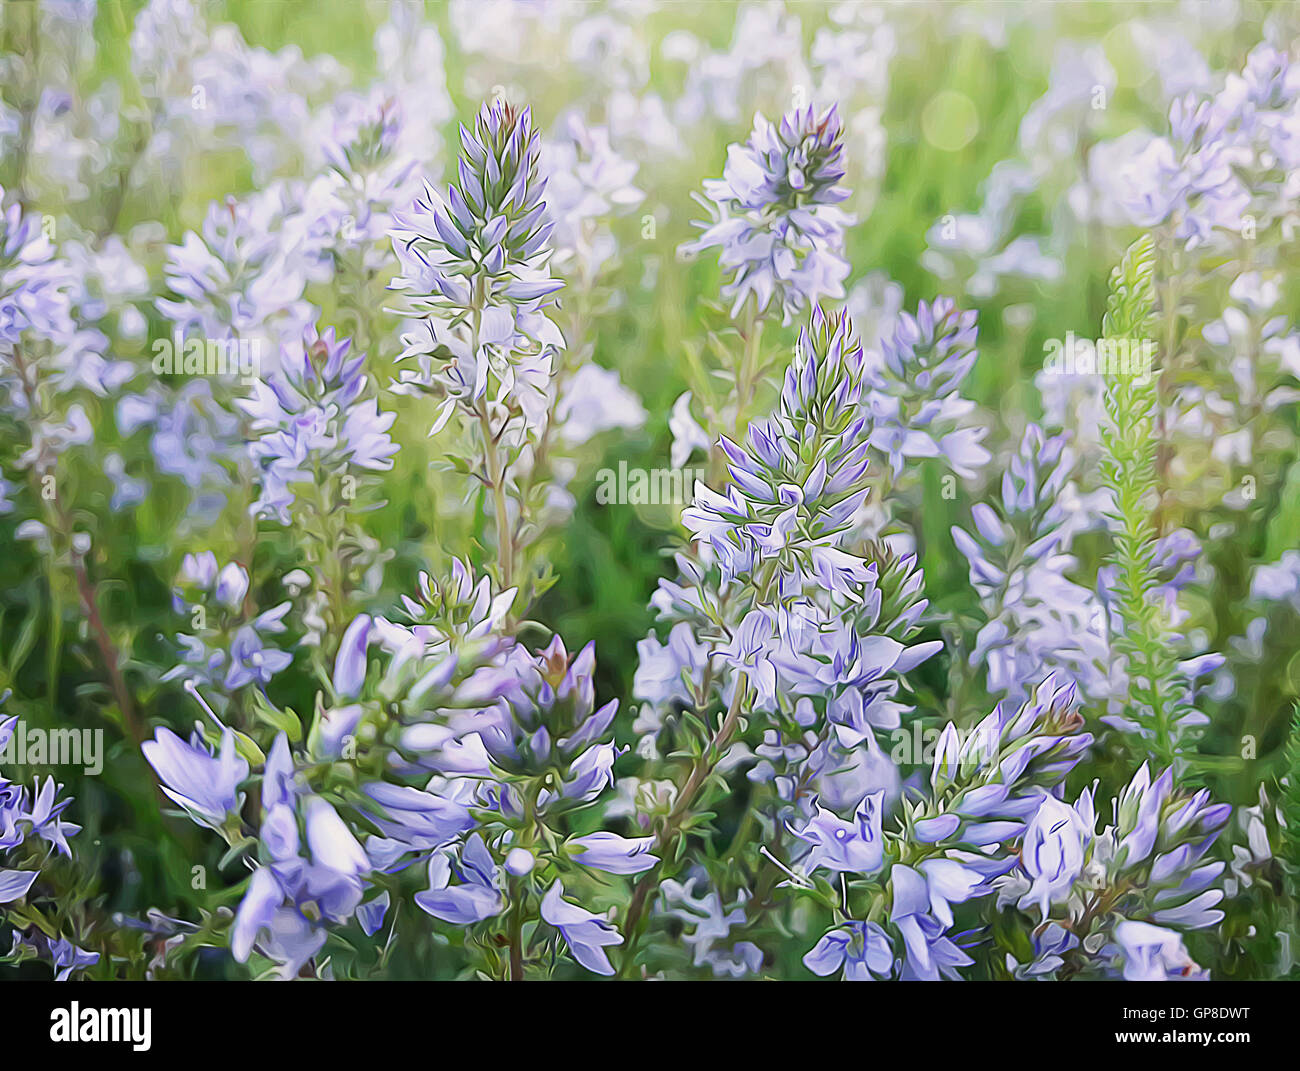 Illustration of spring wild flower meadow. Composition of nature. Stock Photo